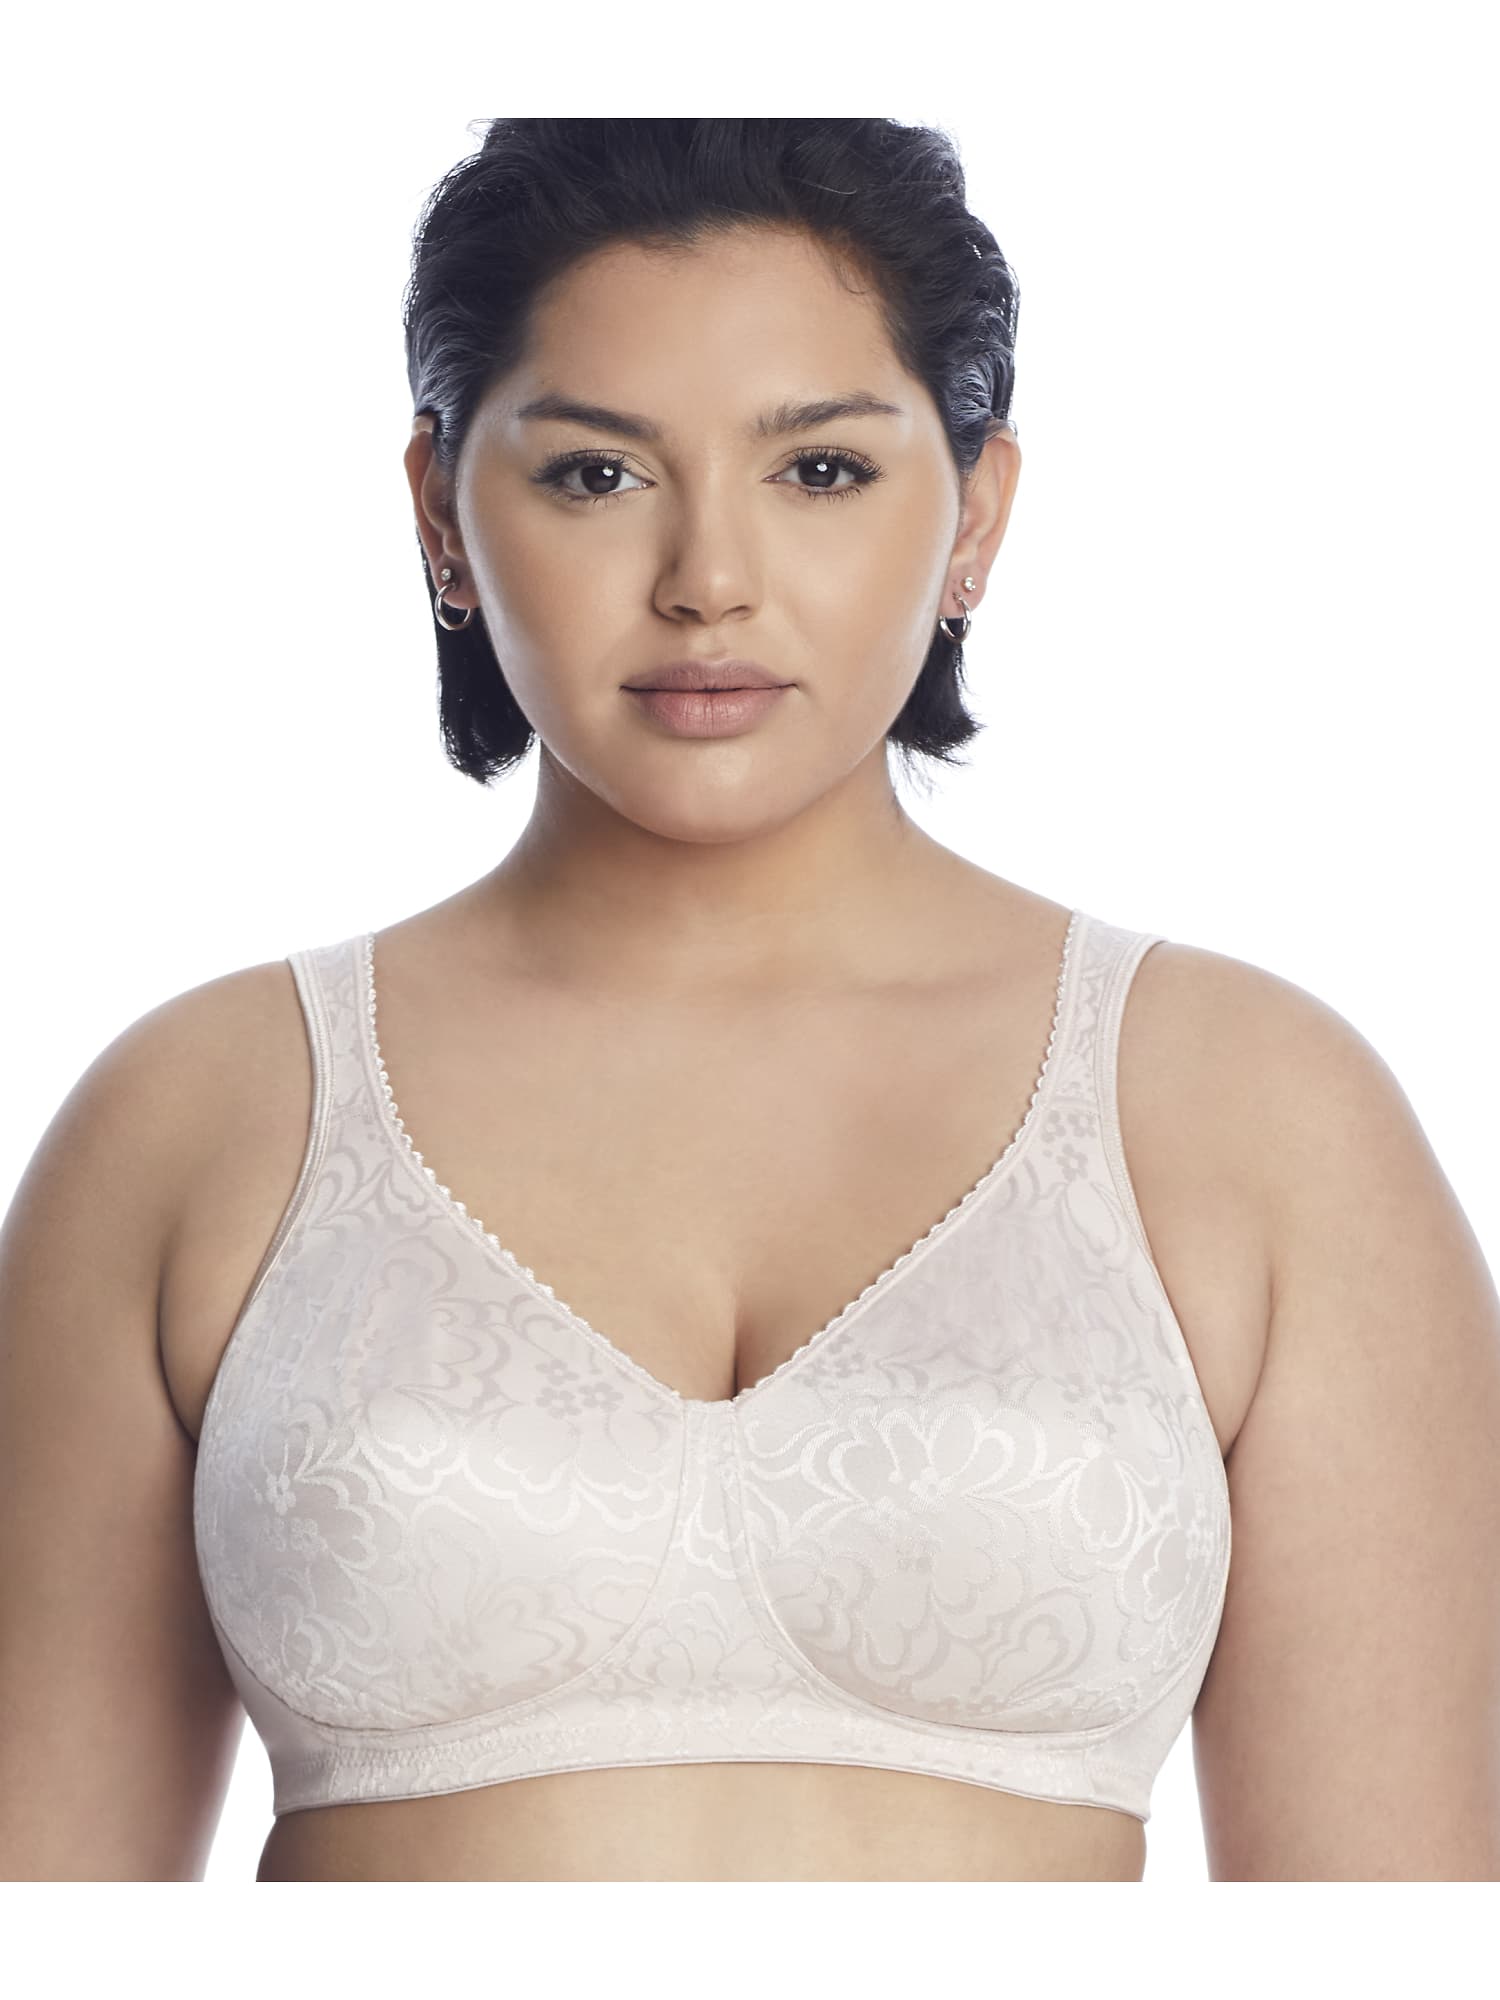  Playtex Womens 18 Hour Ultimate Lift And Support Bra